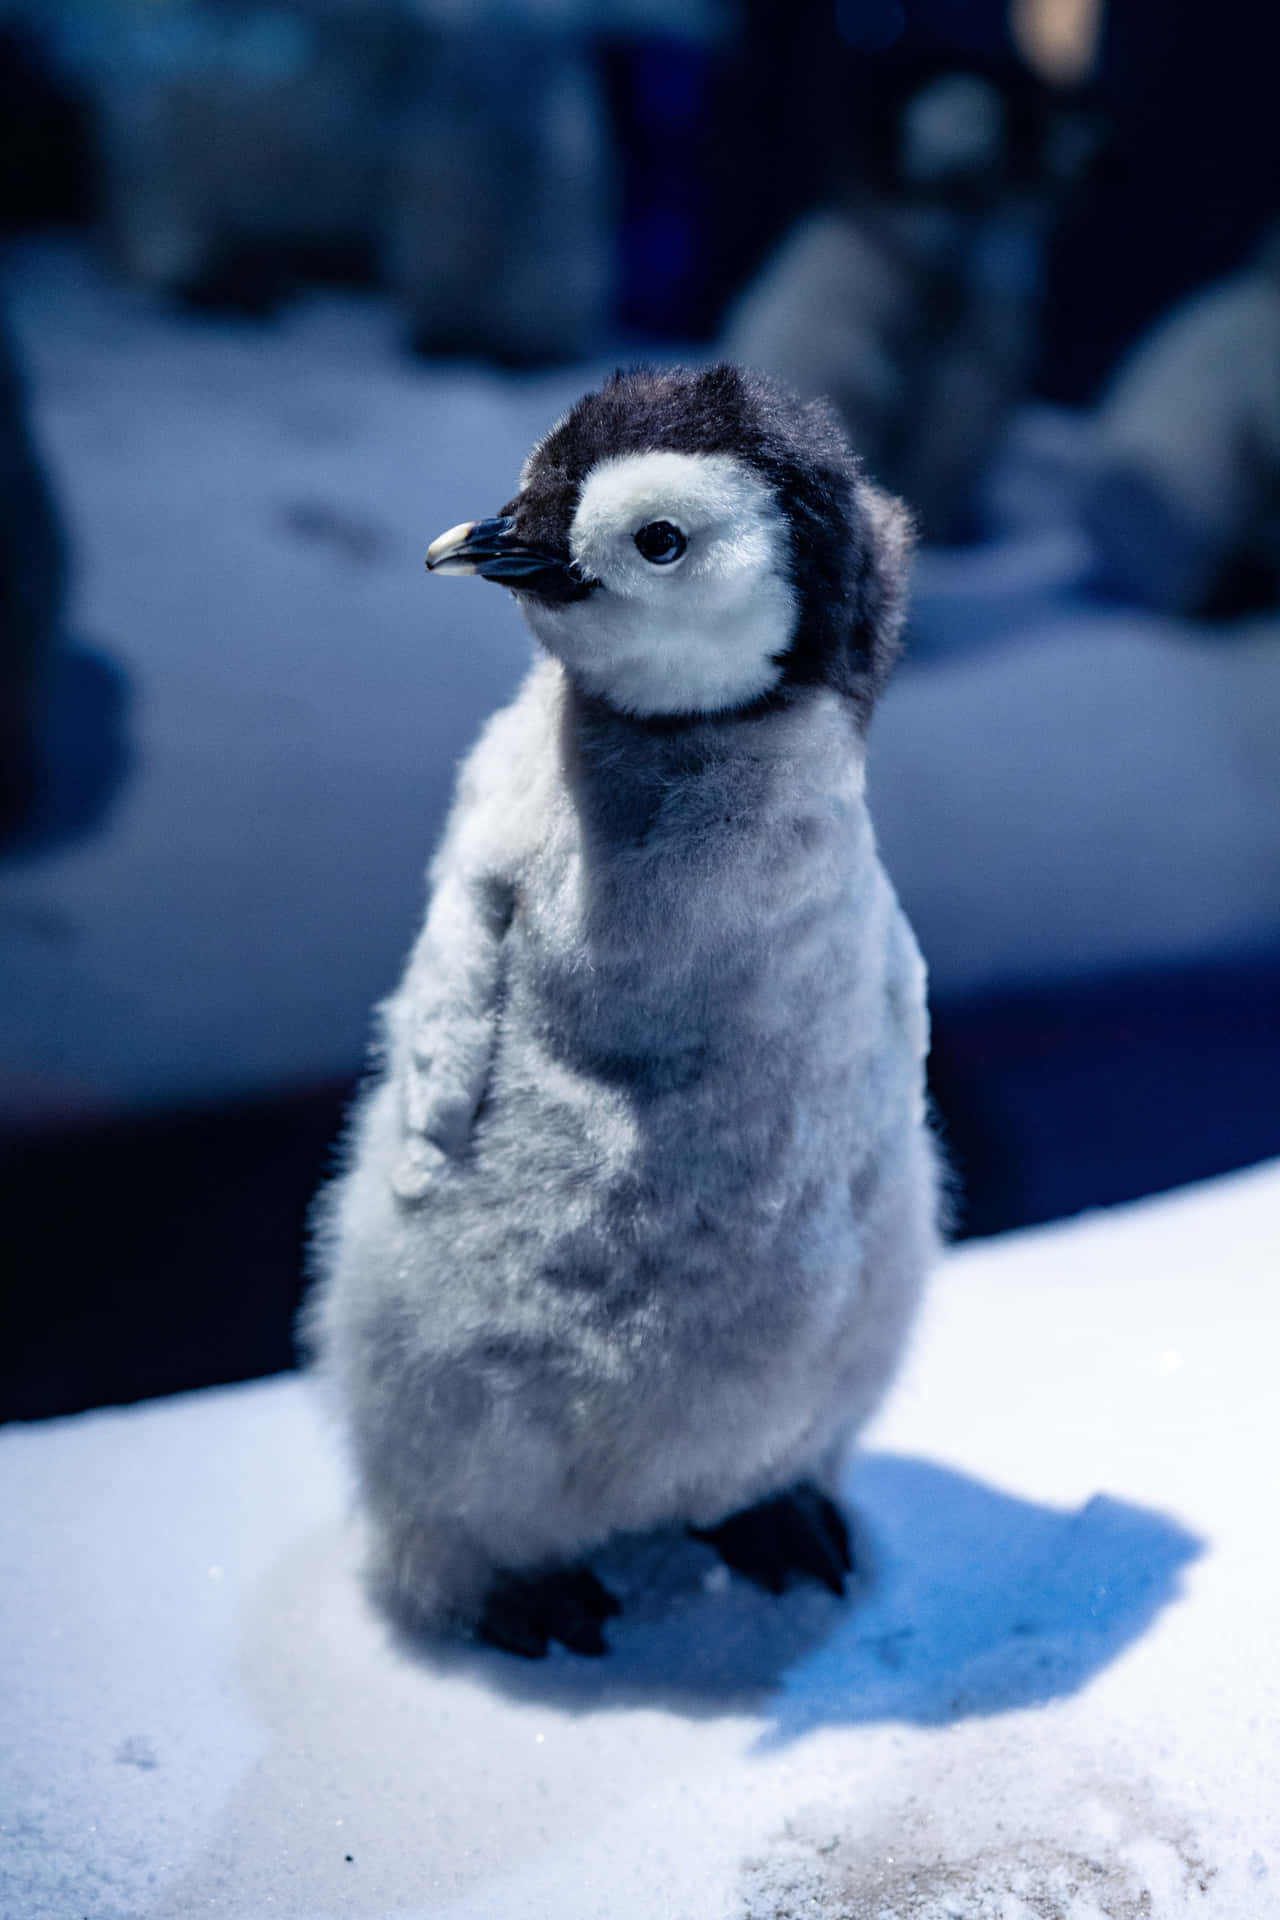 "A cute and cuddly baby penguin posing by the sea"